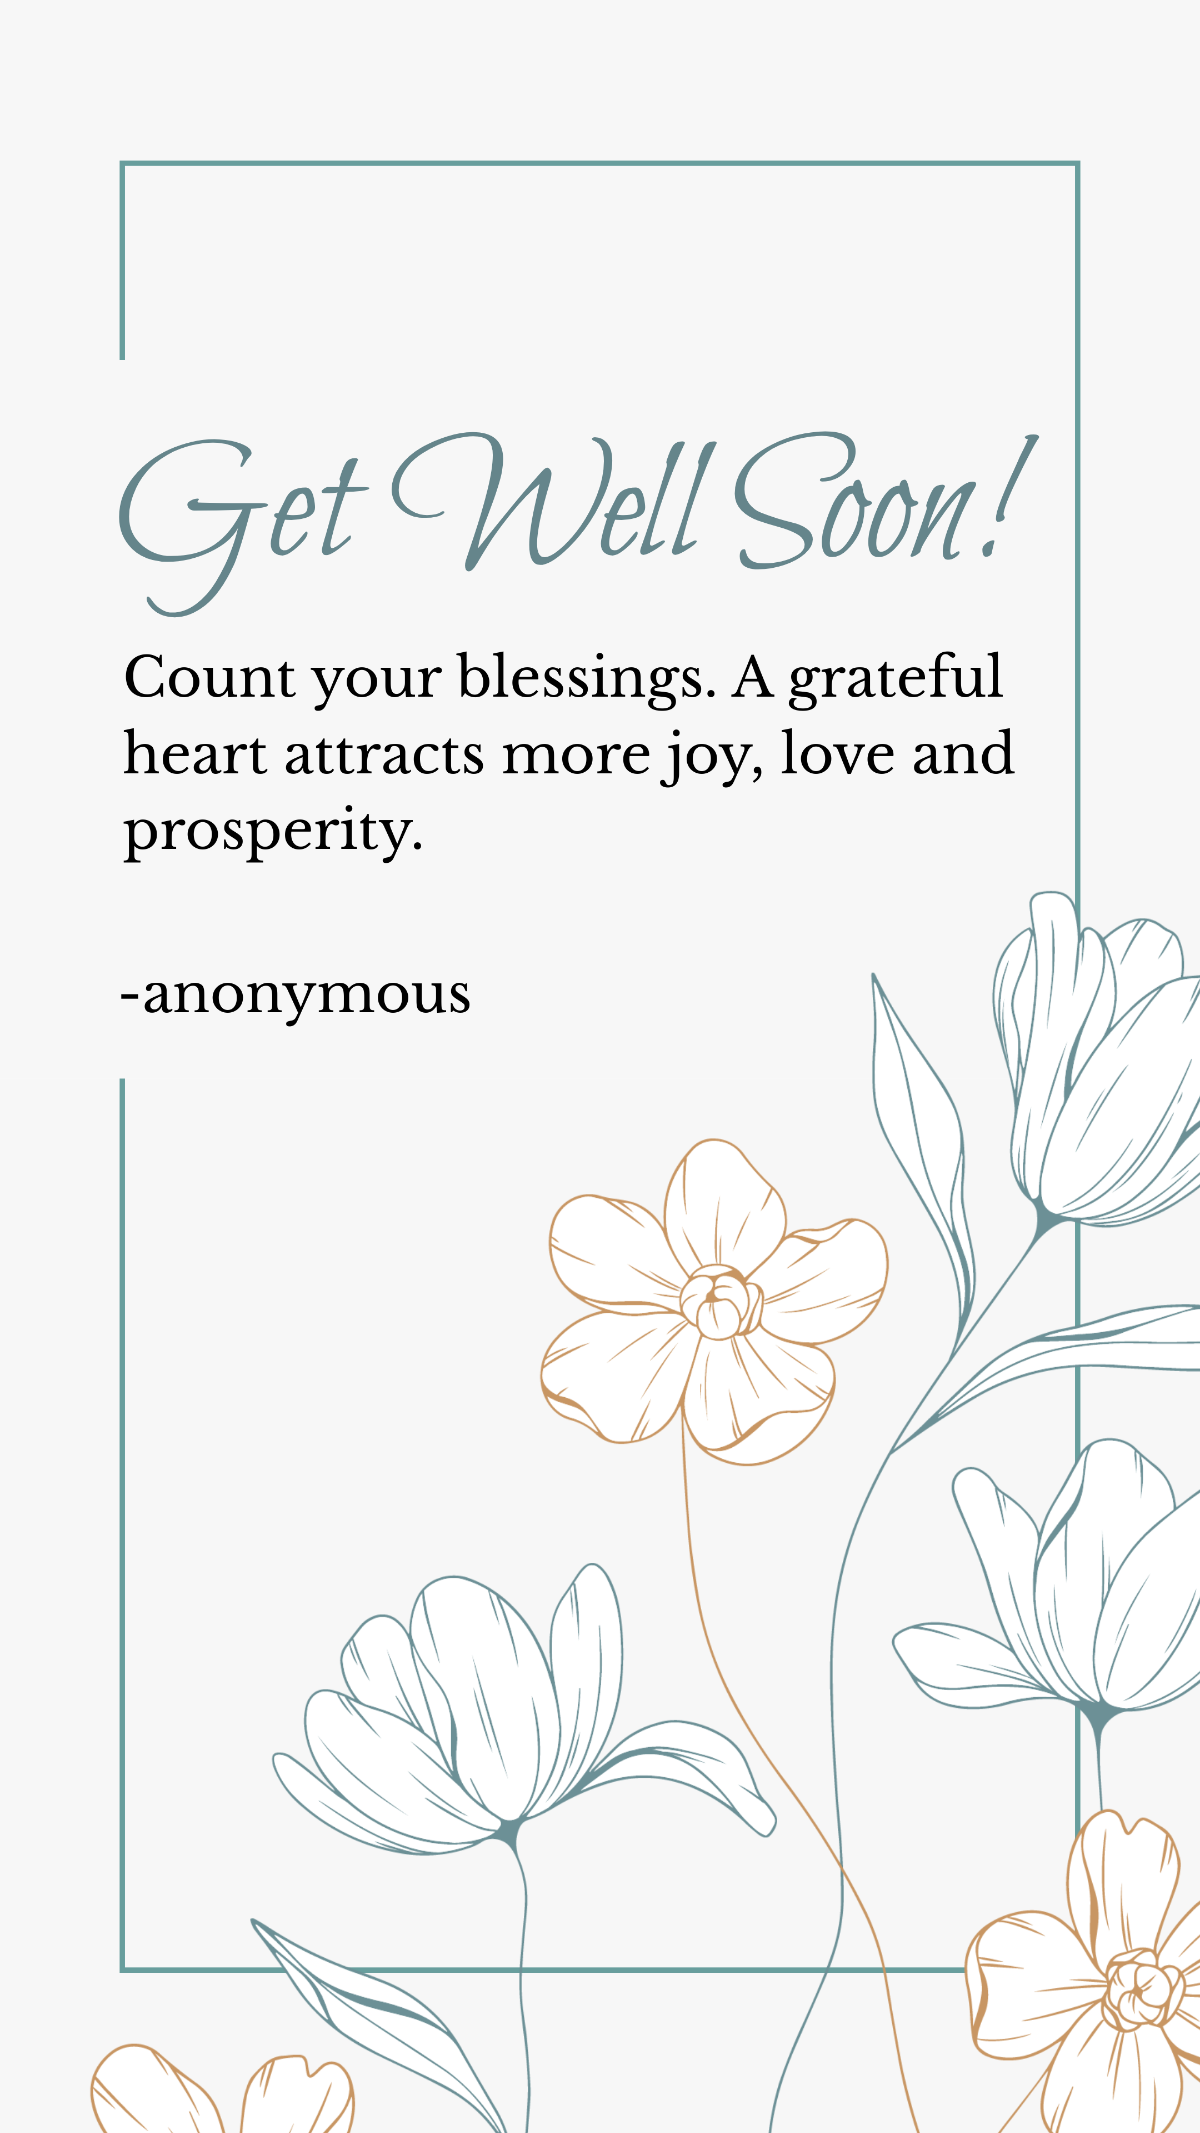 Get Well Soon Blessings Quote Template